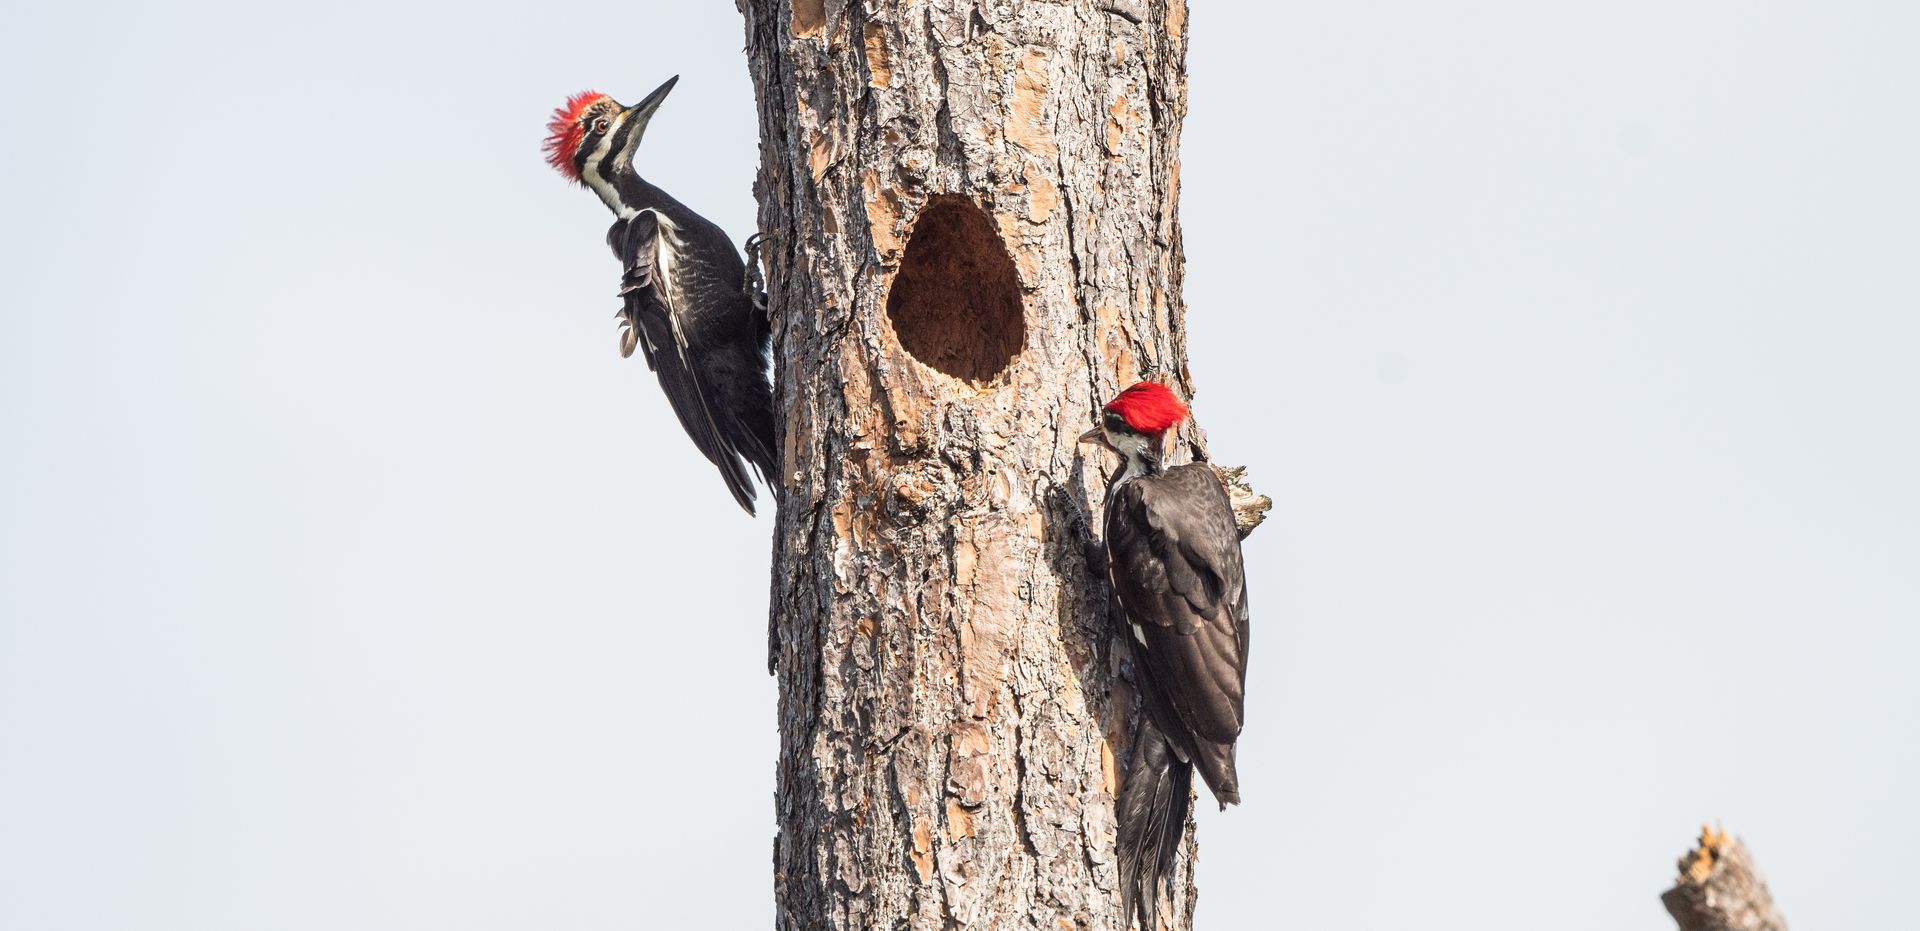 This image shows how woodpeckers make a hole to live in